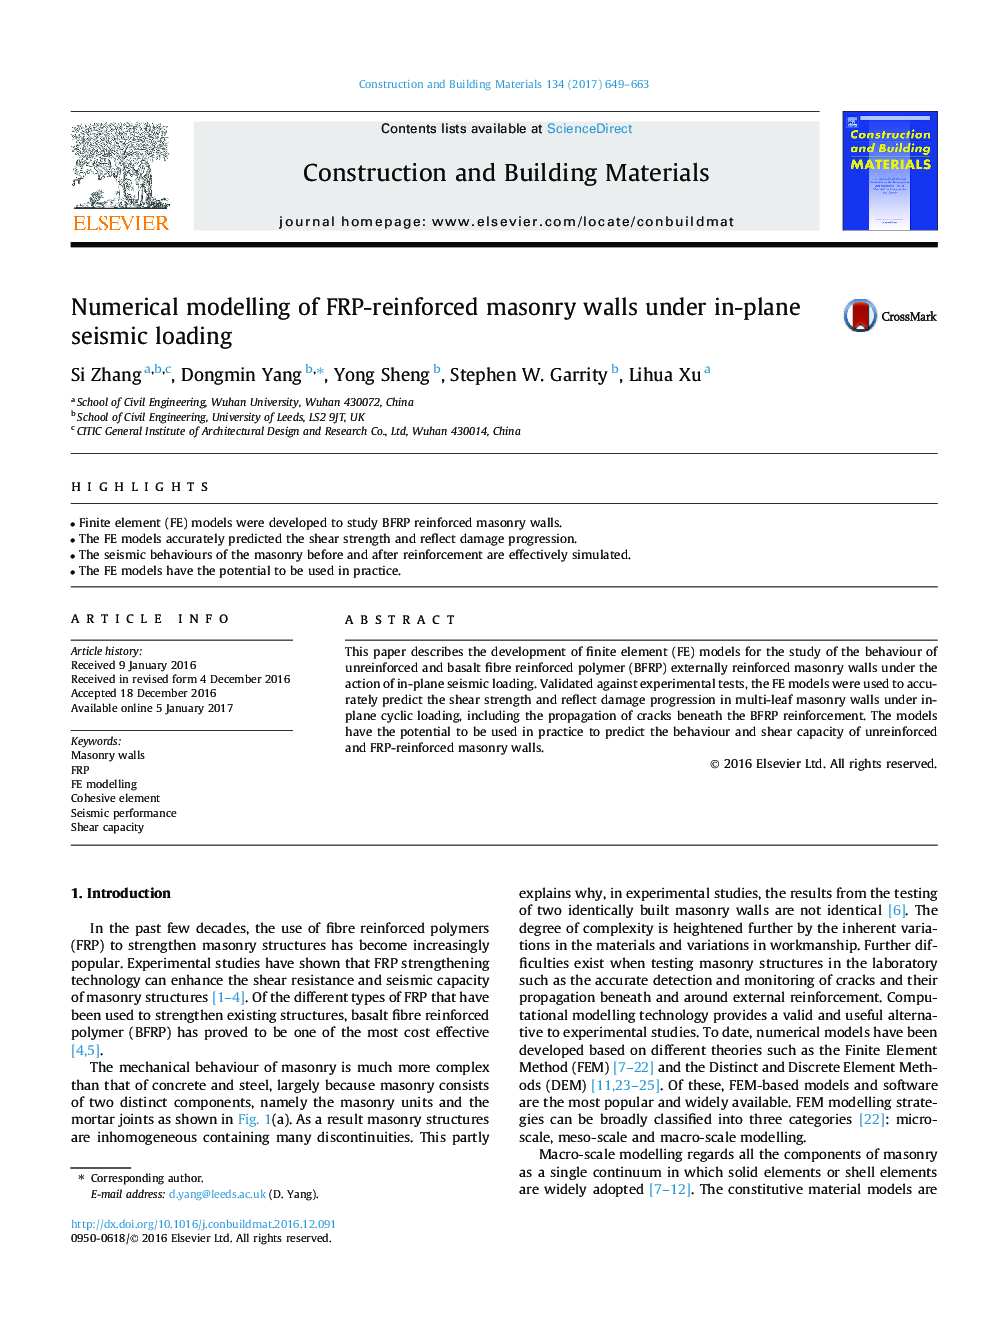 Numerical modelling of FRP-reinforced masonry walls under in-plane seismic loading